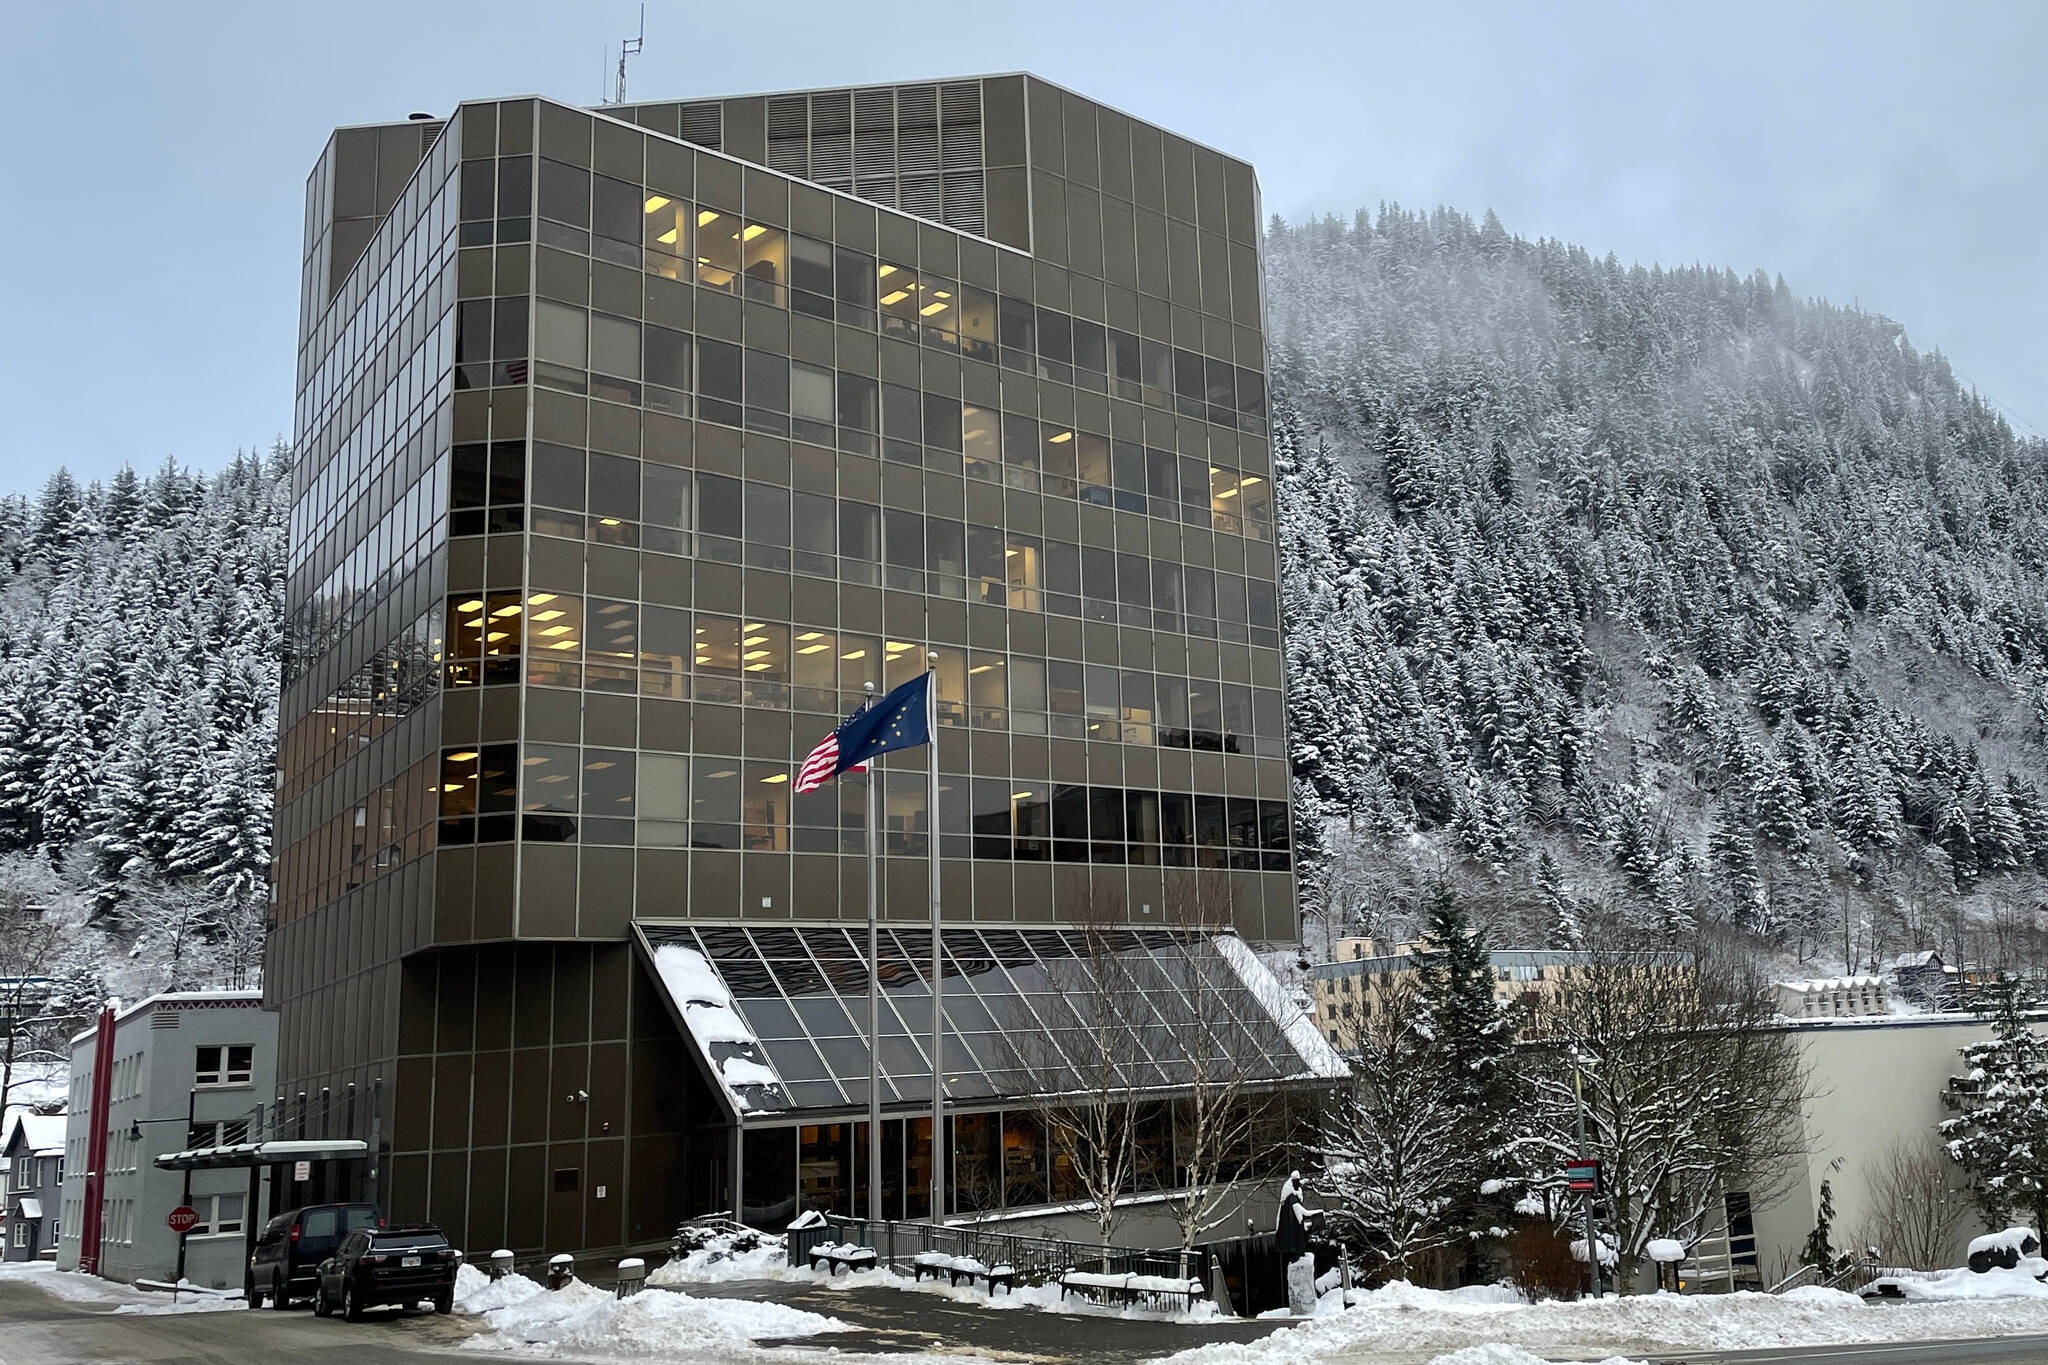 Jury trials at Dimond Courthouse and elsewhere are expected to occur more often and consistently in the next several months as judges seek to get trials moving once again. (Michael S. Lockett / Juneau Empire)